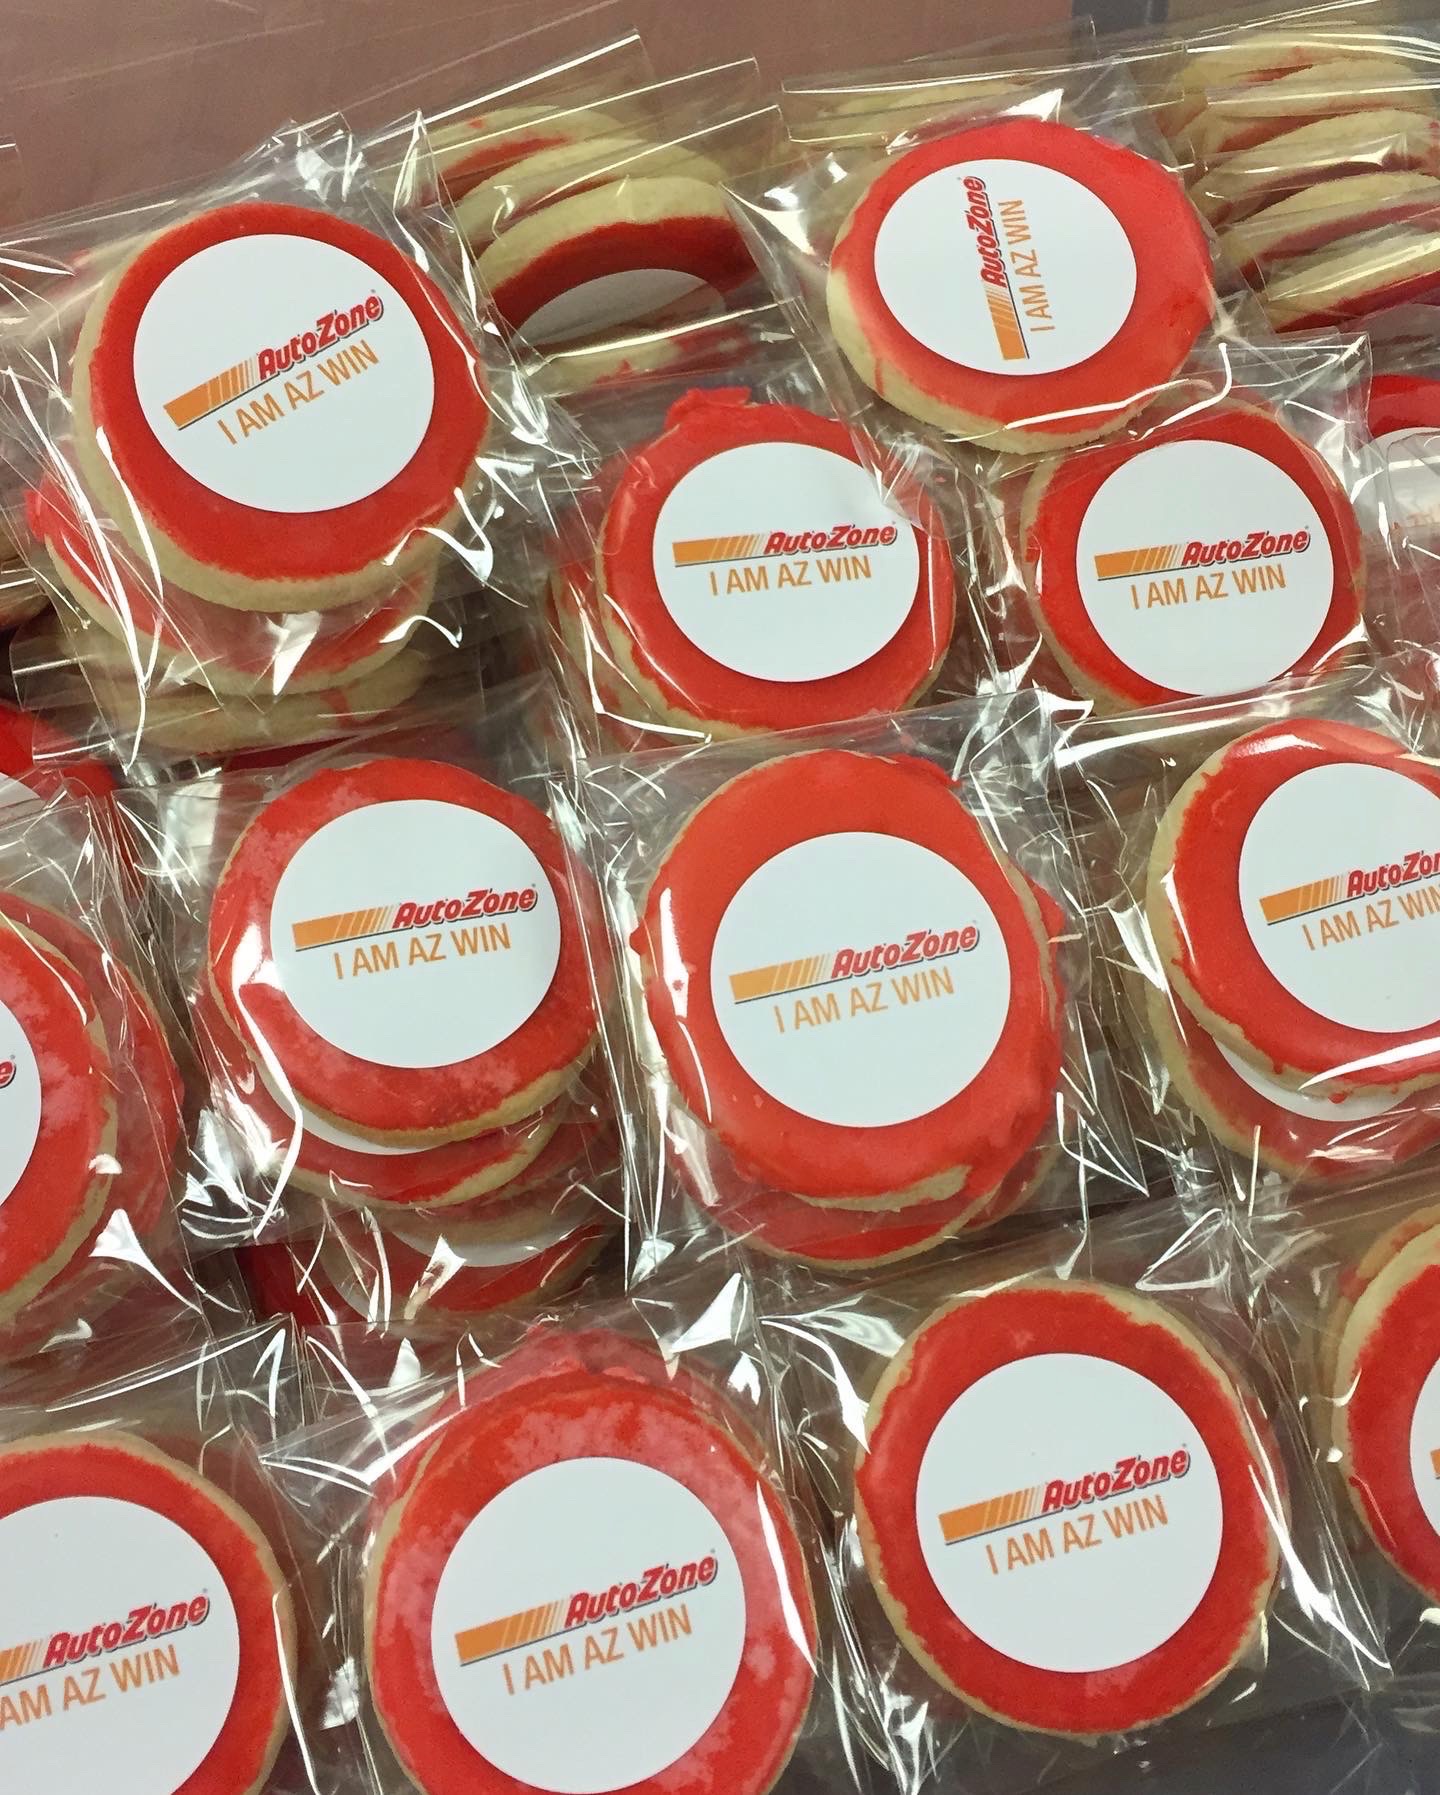 Autozone Branded Individually Wrapped Cookies Memphis